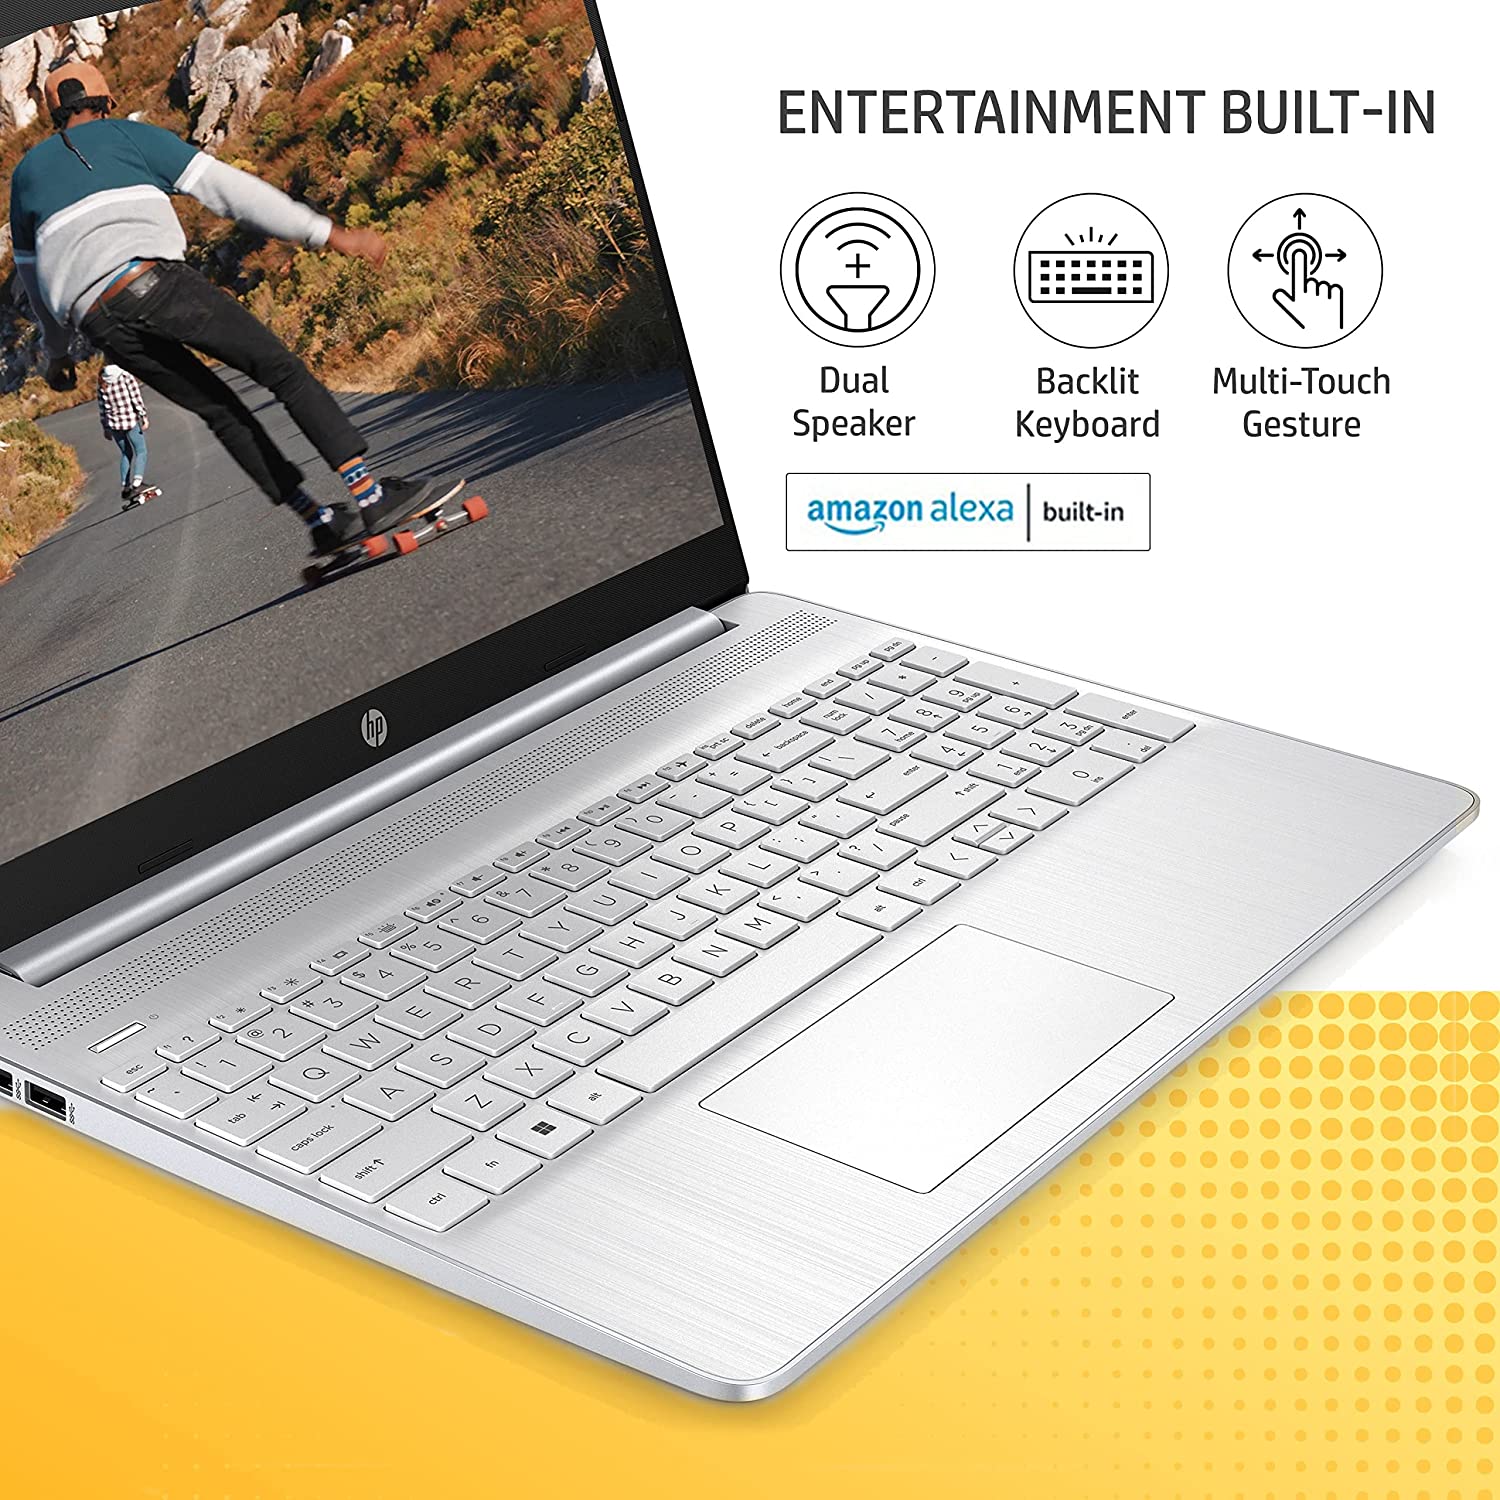 Hp 15s Fq5112tu Laptop With 12th Gen Intel Core I5 1235u Launched In India 16gb Ram 512gb 9818